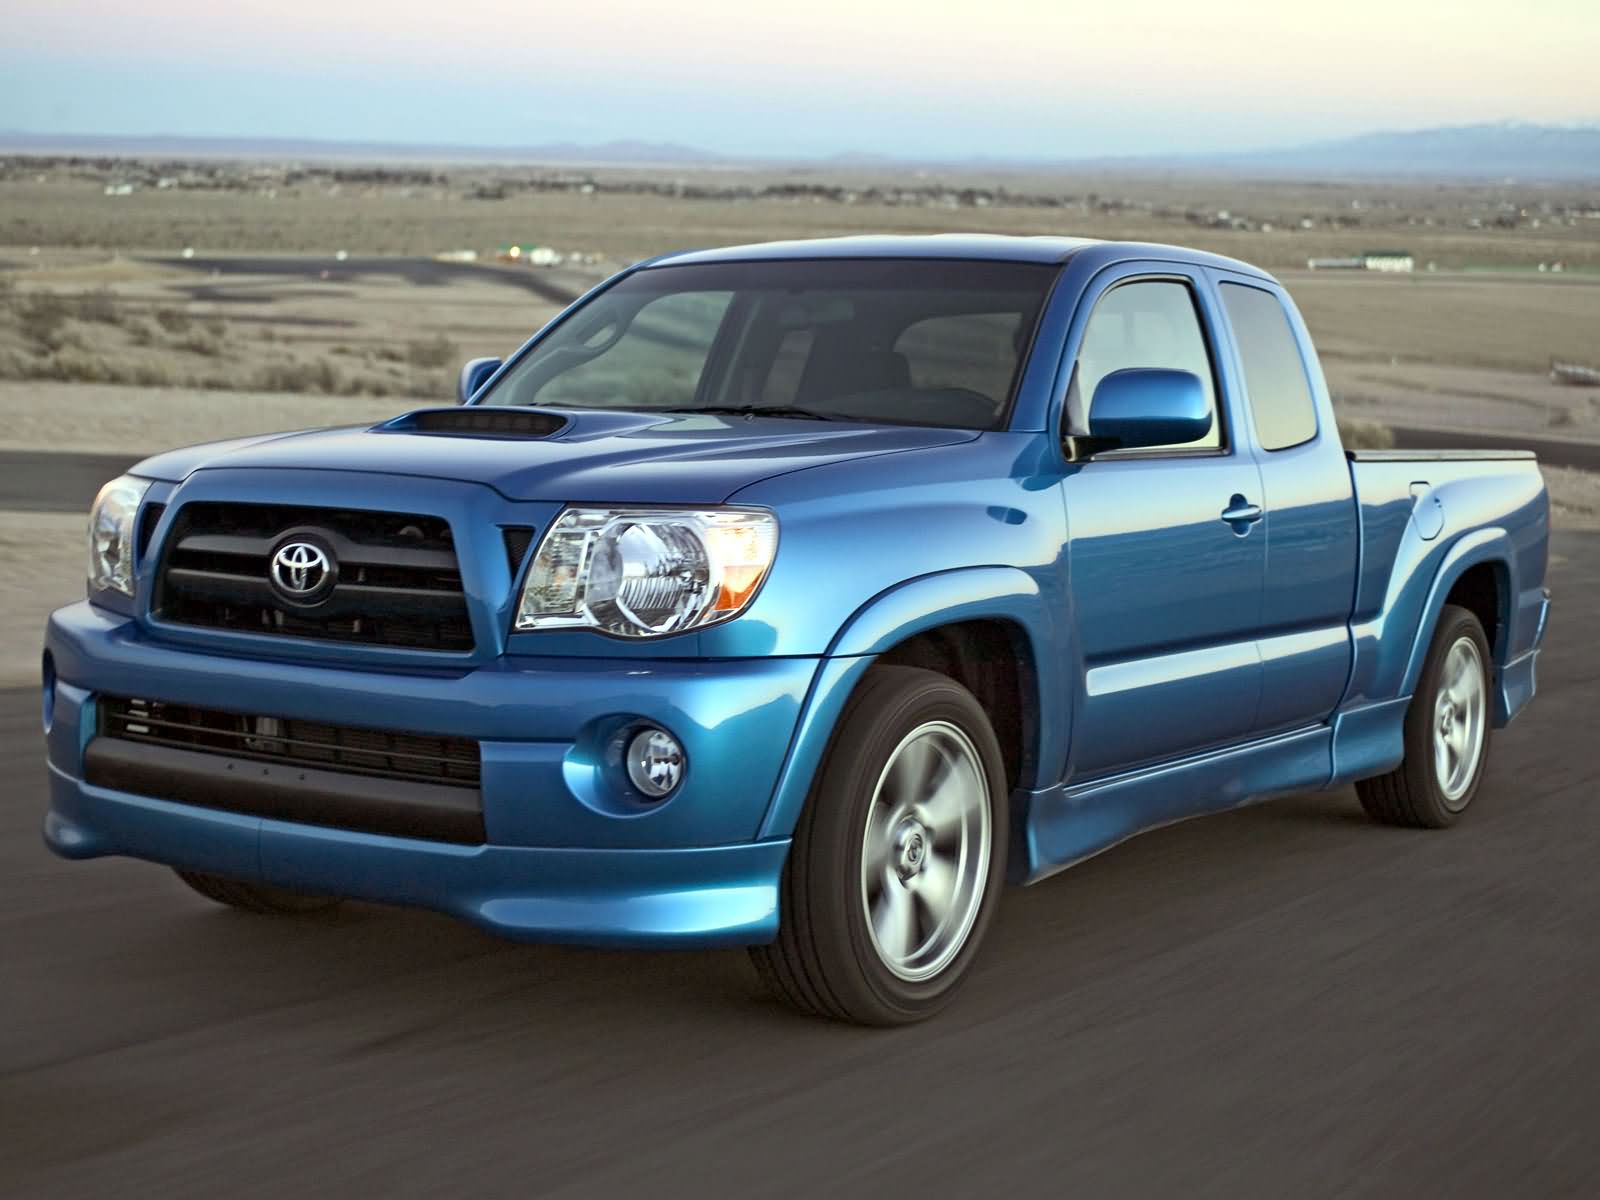 Car in pictures – car photo gallery » Toyota Tacoma X-Runner 2005 Photo 12